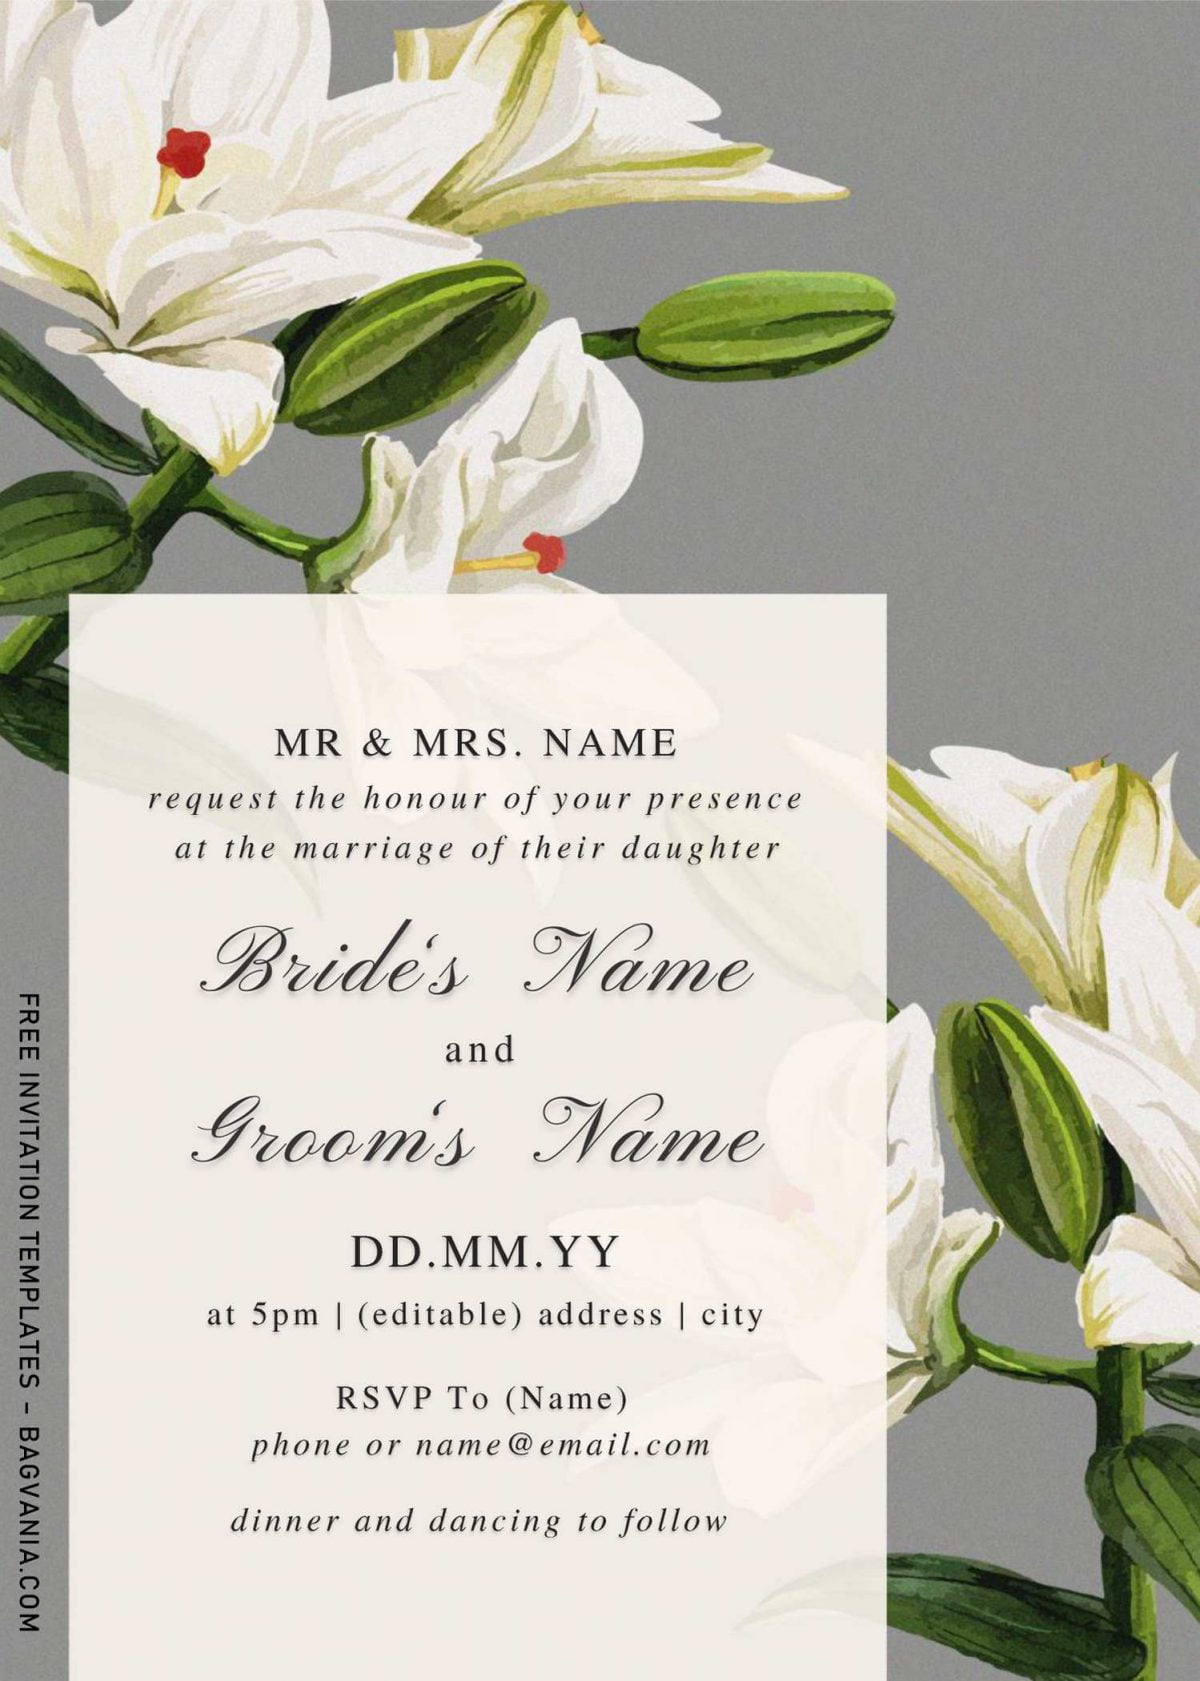 Free Watercolor Lily Wedding Invitation Templates For Word and has portrait orientation